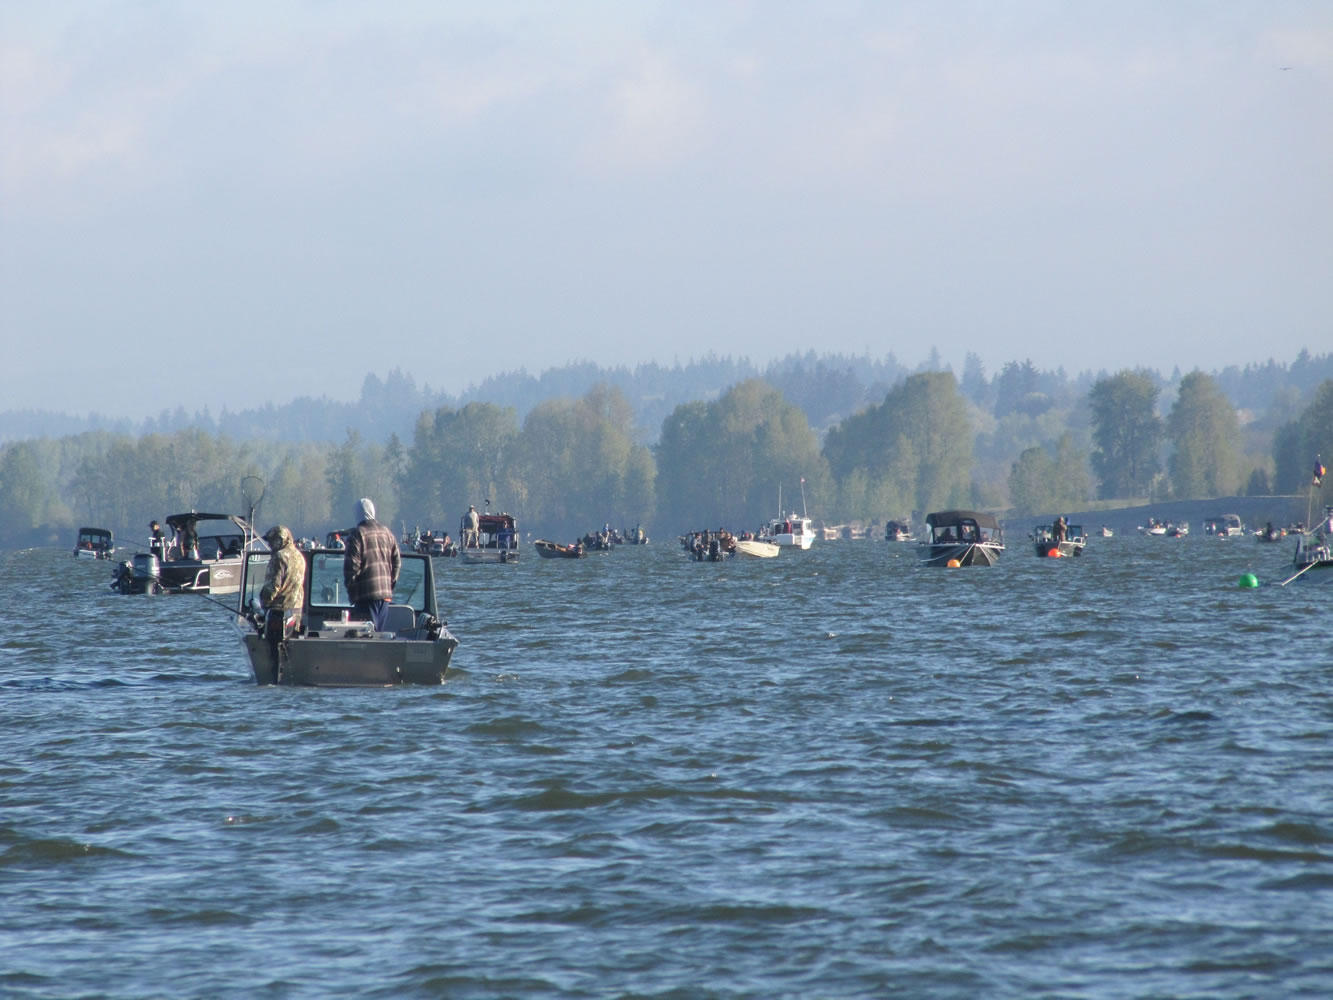 Boats were thick on the lower Columbia River when the spring chinook season was open in April.